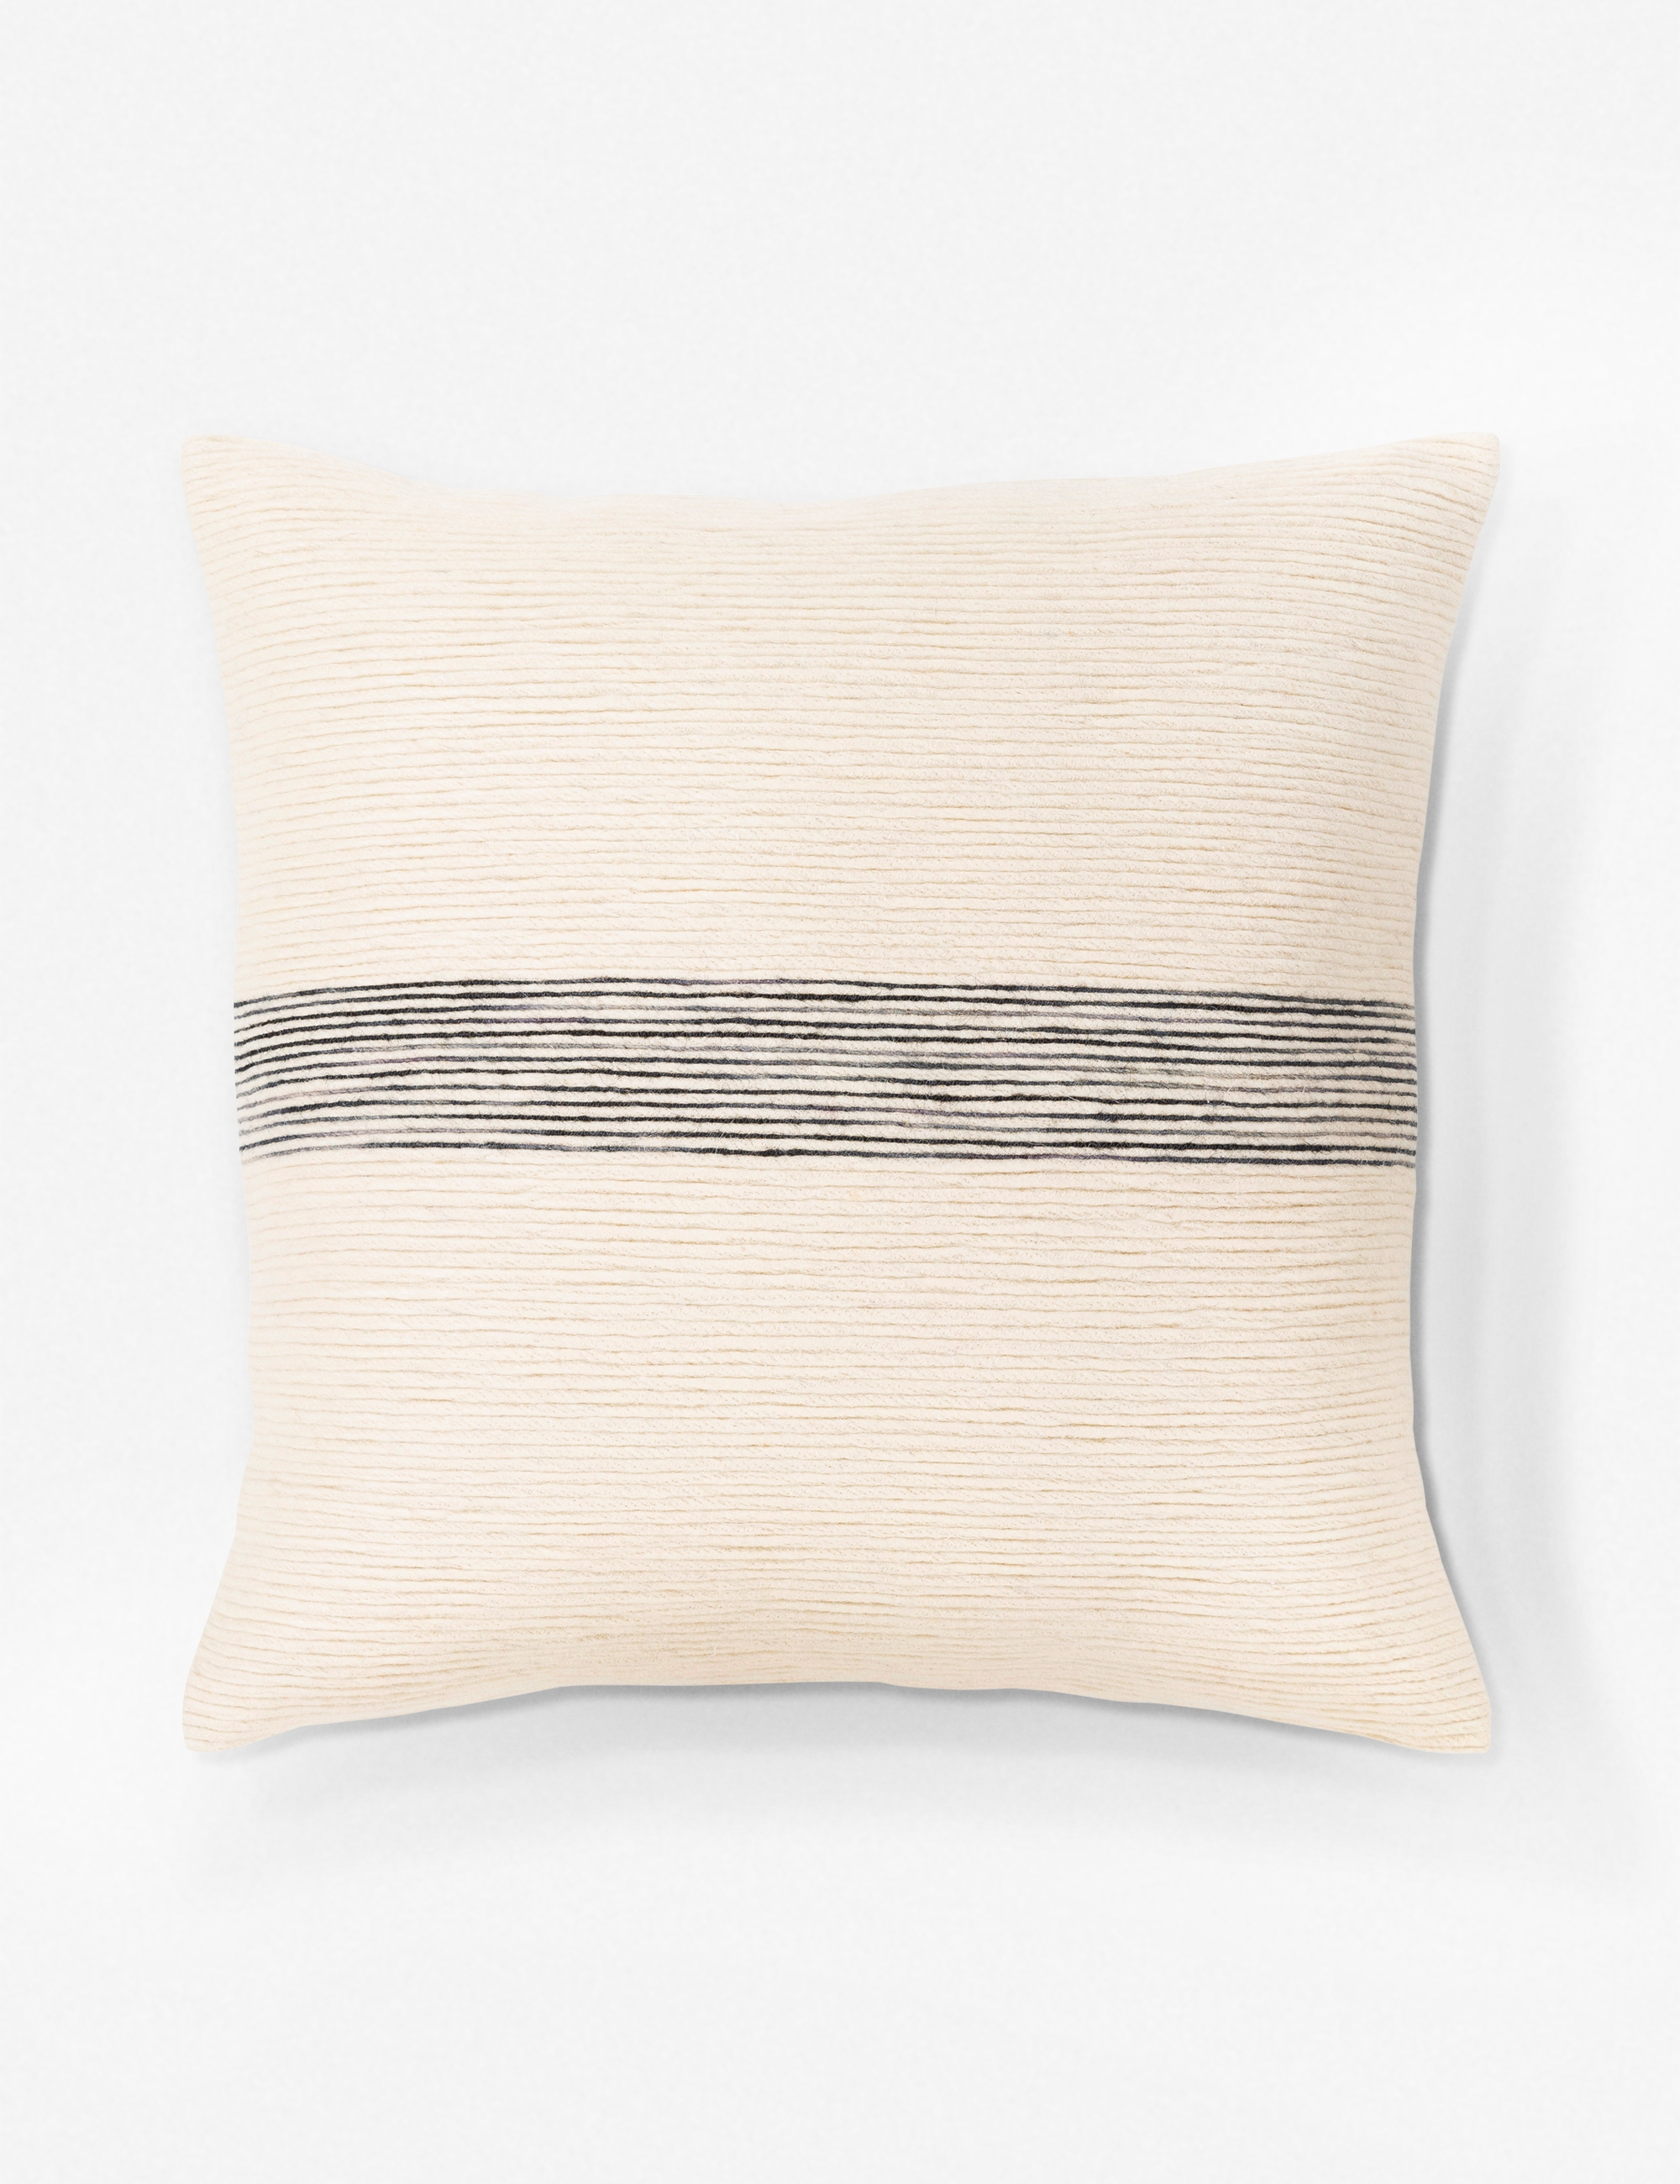 Selma Pillow, Cream and Charcoal - Image 1